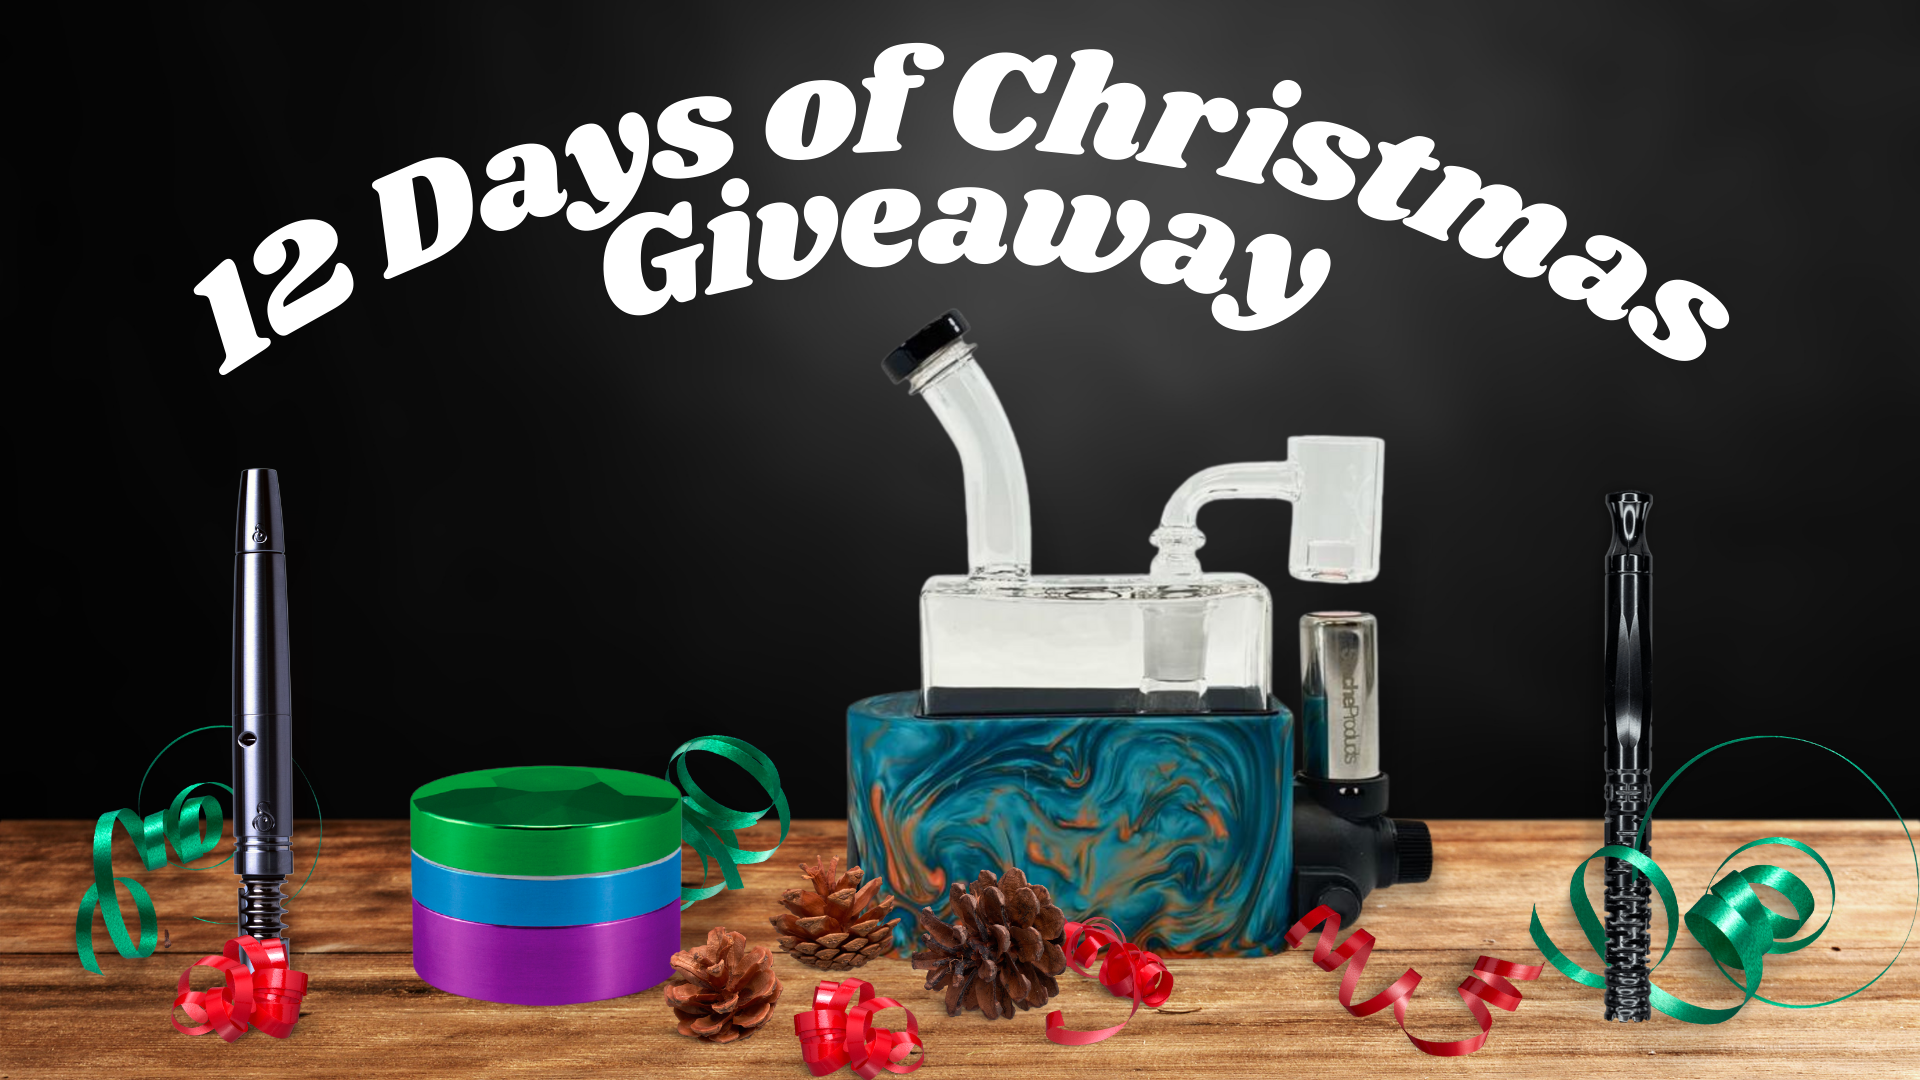 12 Days of Christmas Giveaway prize banner